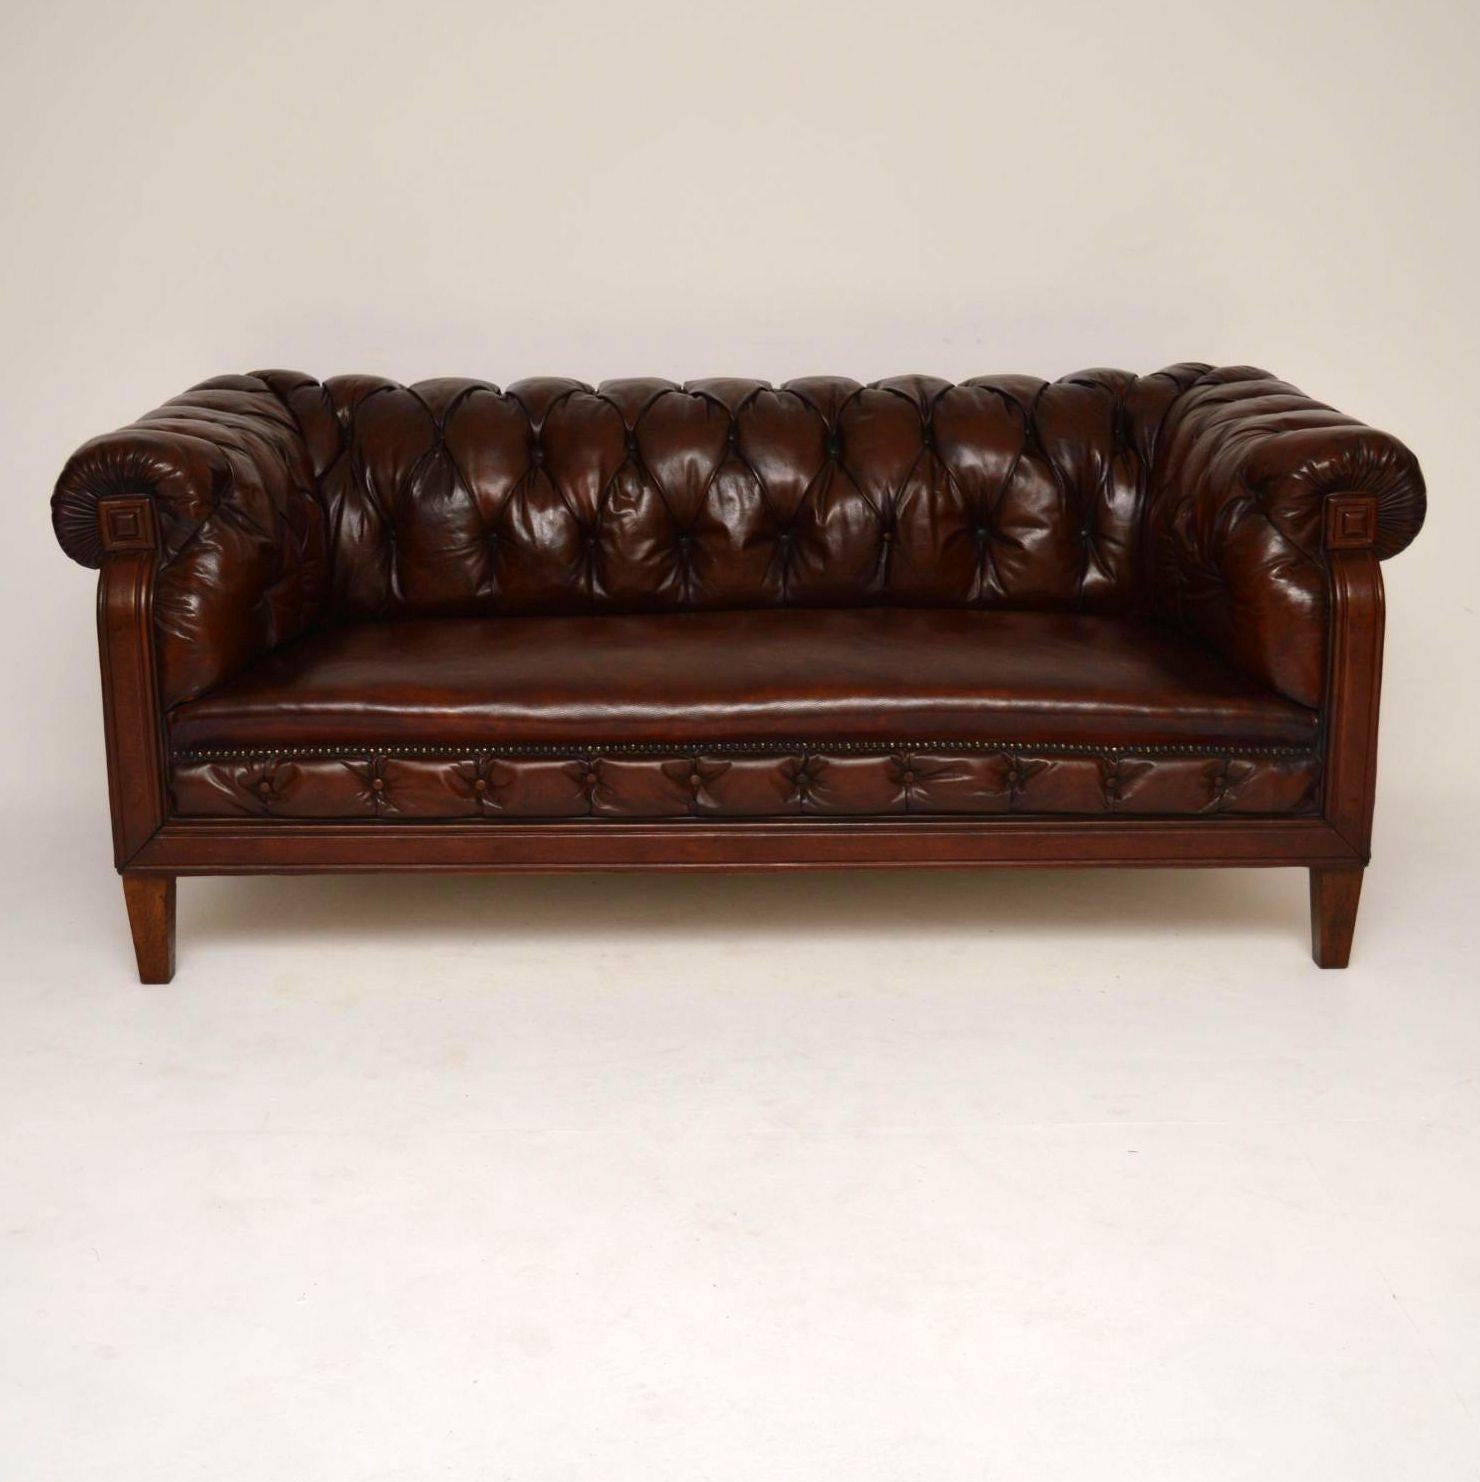 This antique Swedish leather Chesterfield sofa is very stylish & has a great look, plus it's very comfortable too. It's deep buttoned in all the right places, with some hand studding & sits on strong tapered legs. I particularly like the